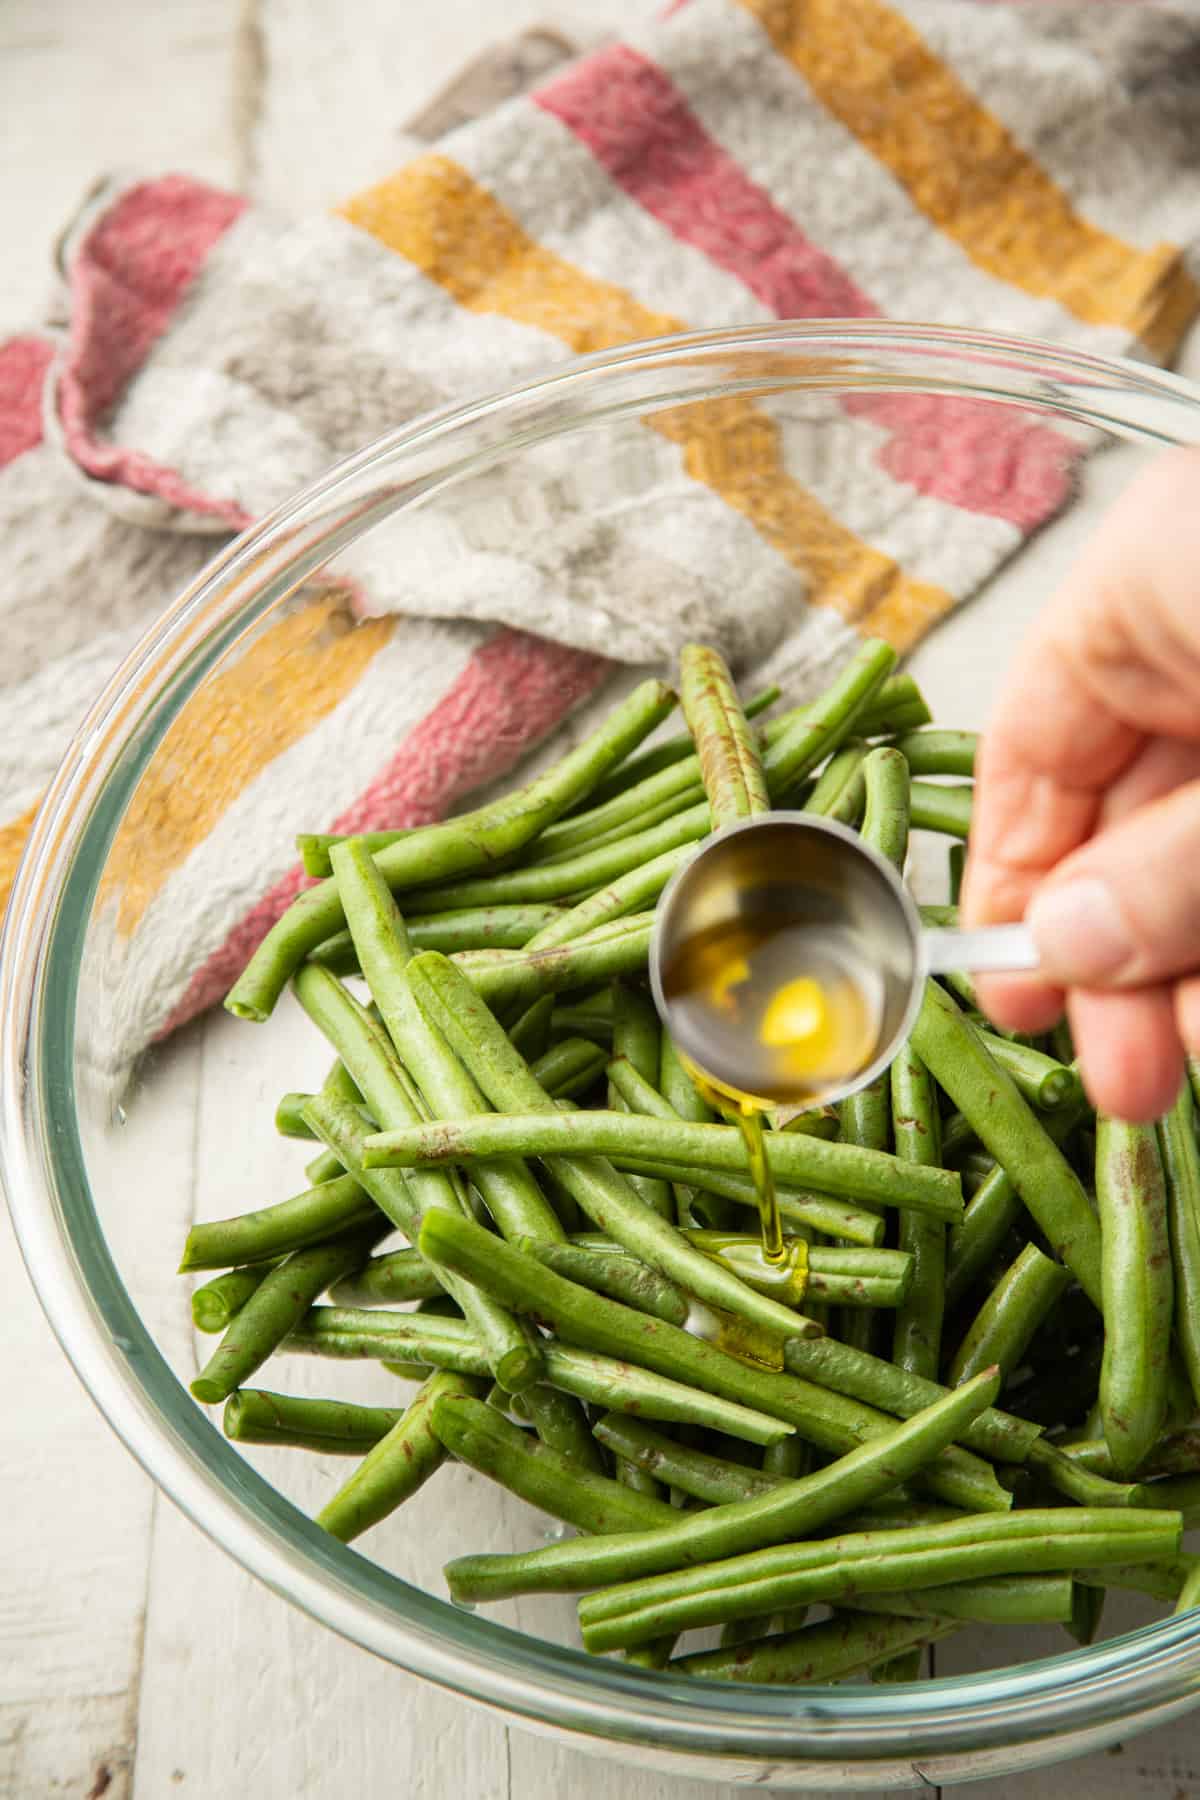 Hand drizzling olive oil into a bowl of green beans.